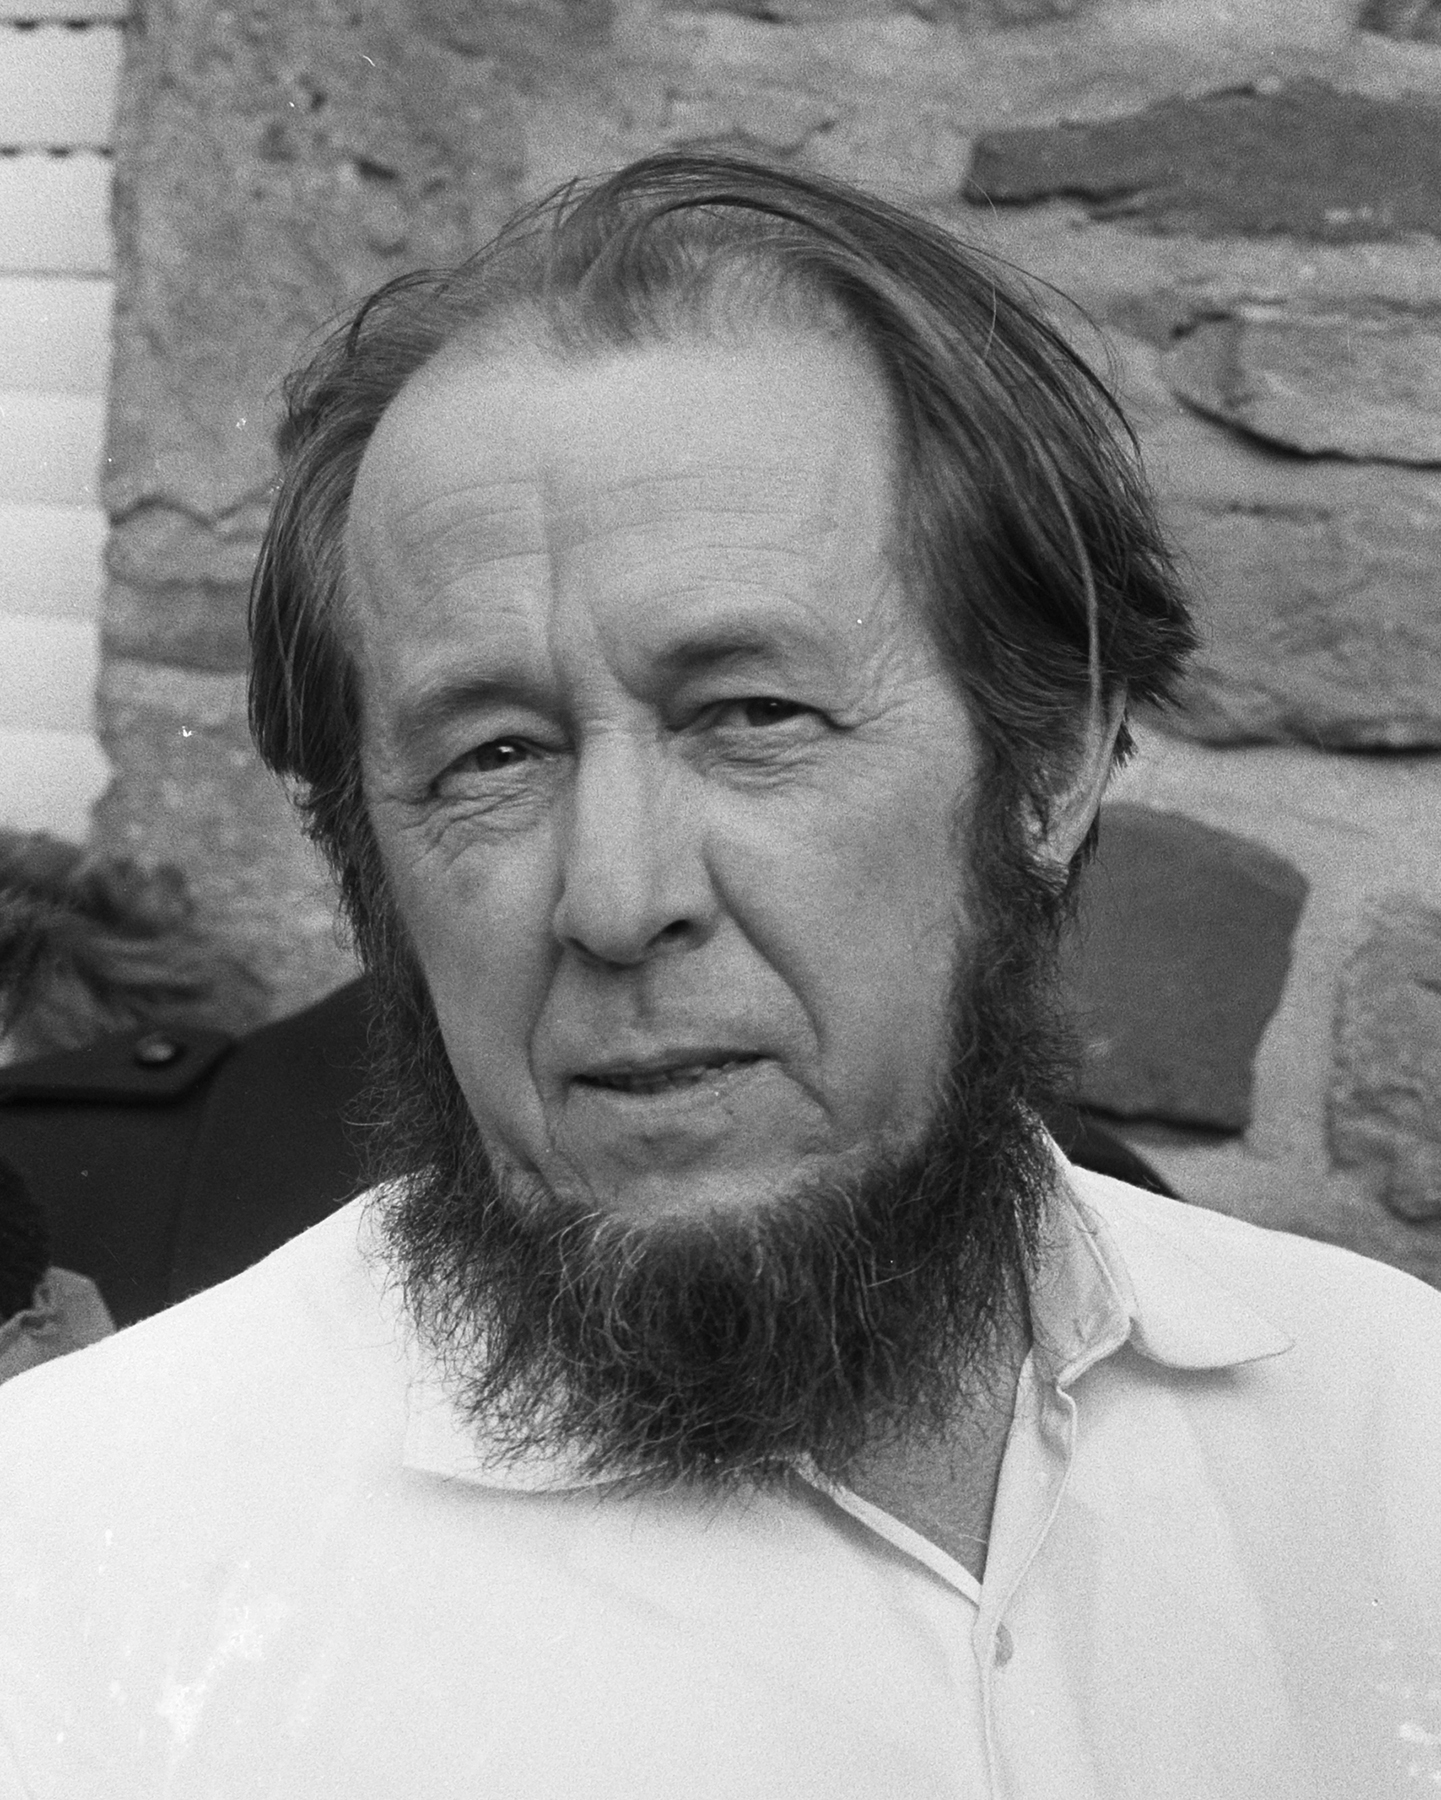 Aleksandr Solzhenitsyn, 1974. (Picture: anonymous/Nationaal Archief, Netherlands)